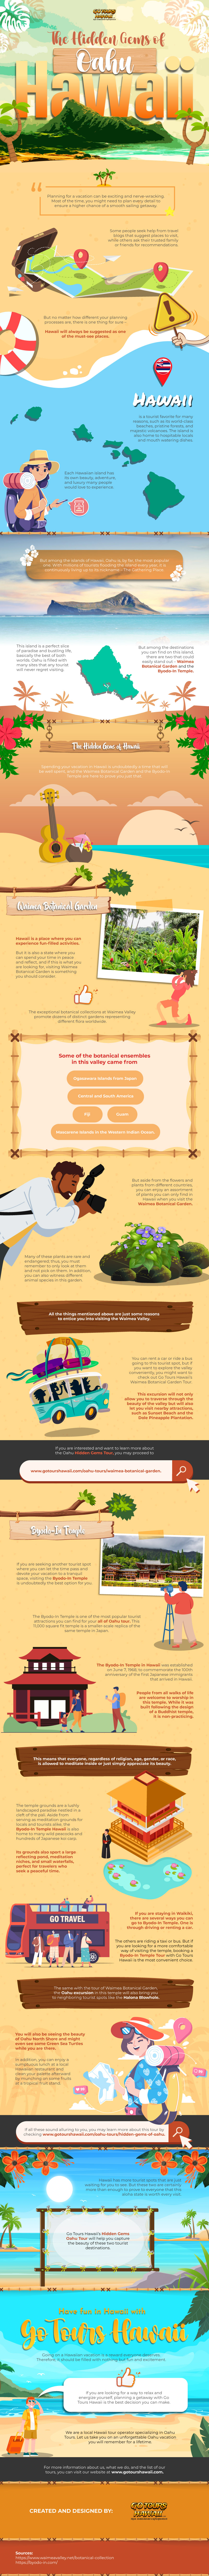 The-Hidden-Gems-of-Oahu-Hawaii-Infographic-Image-HFS65